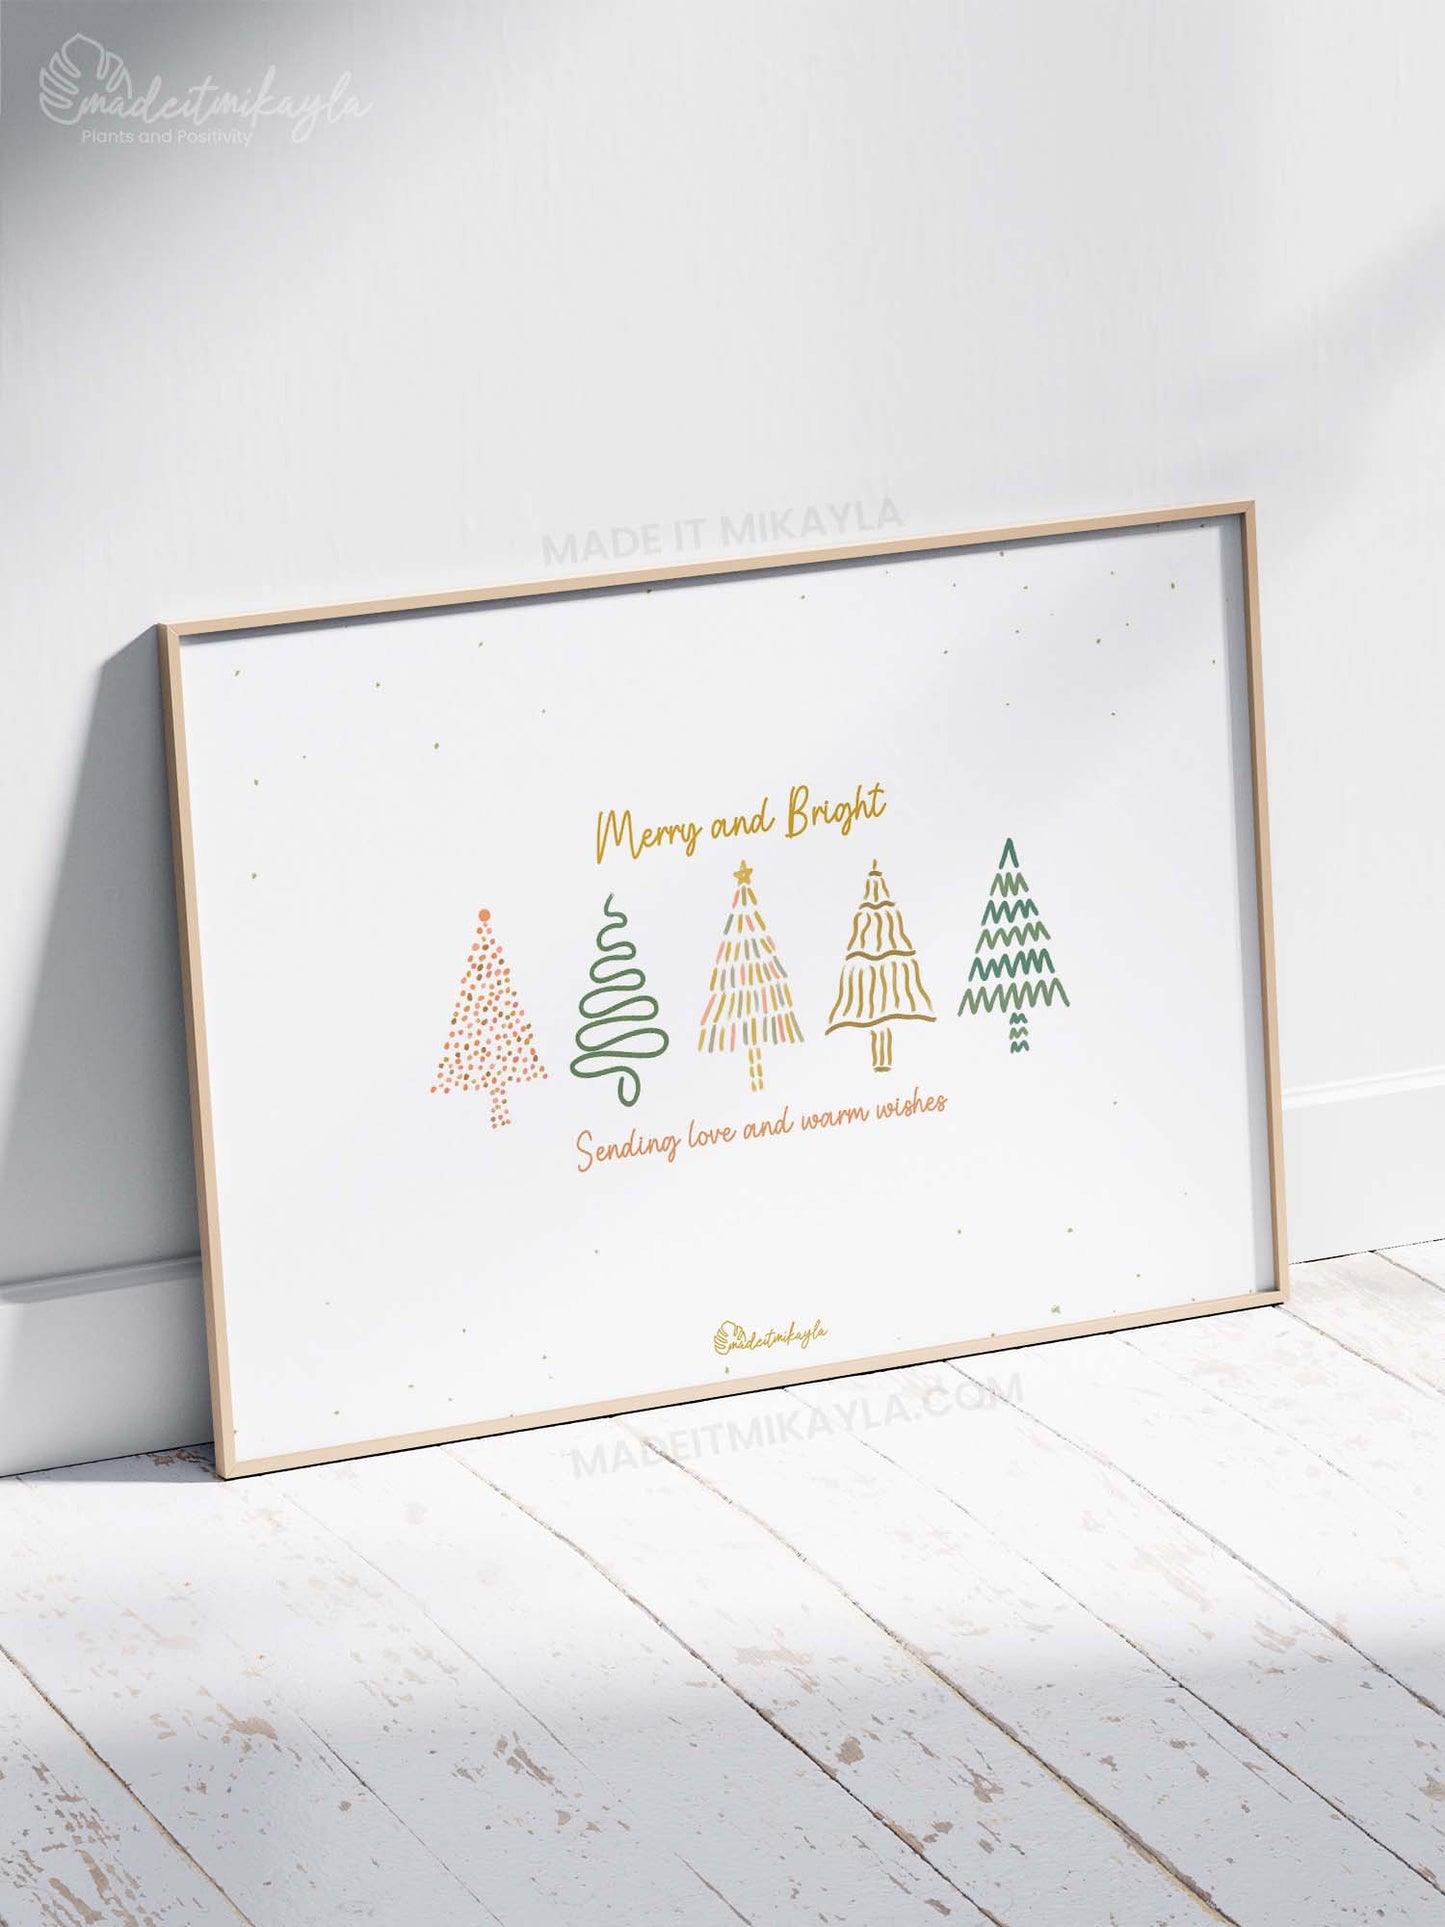 Sending Love and Warm Wishes Art Print